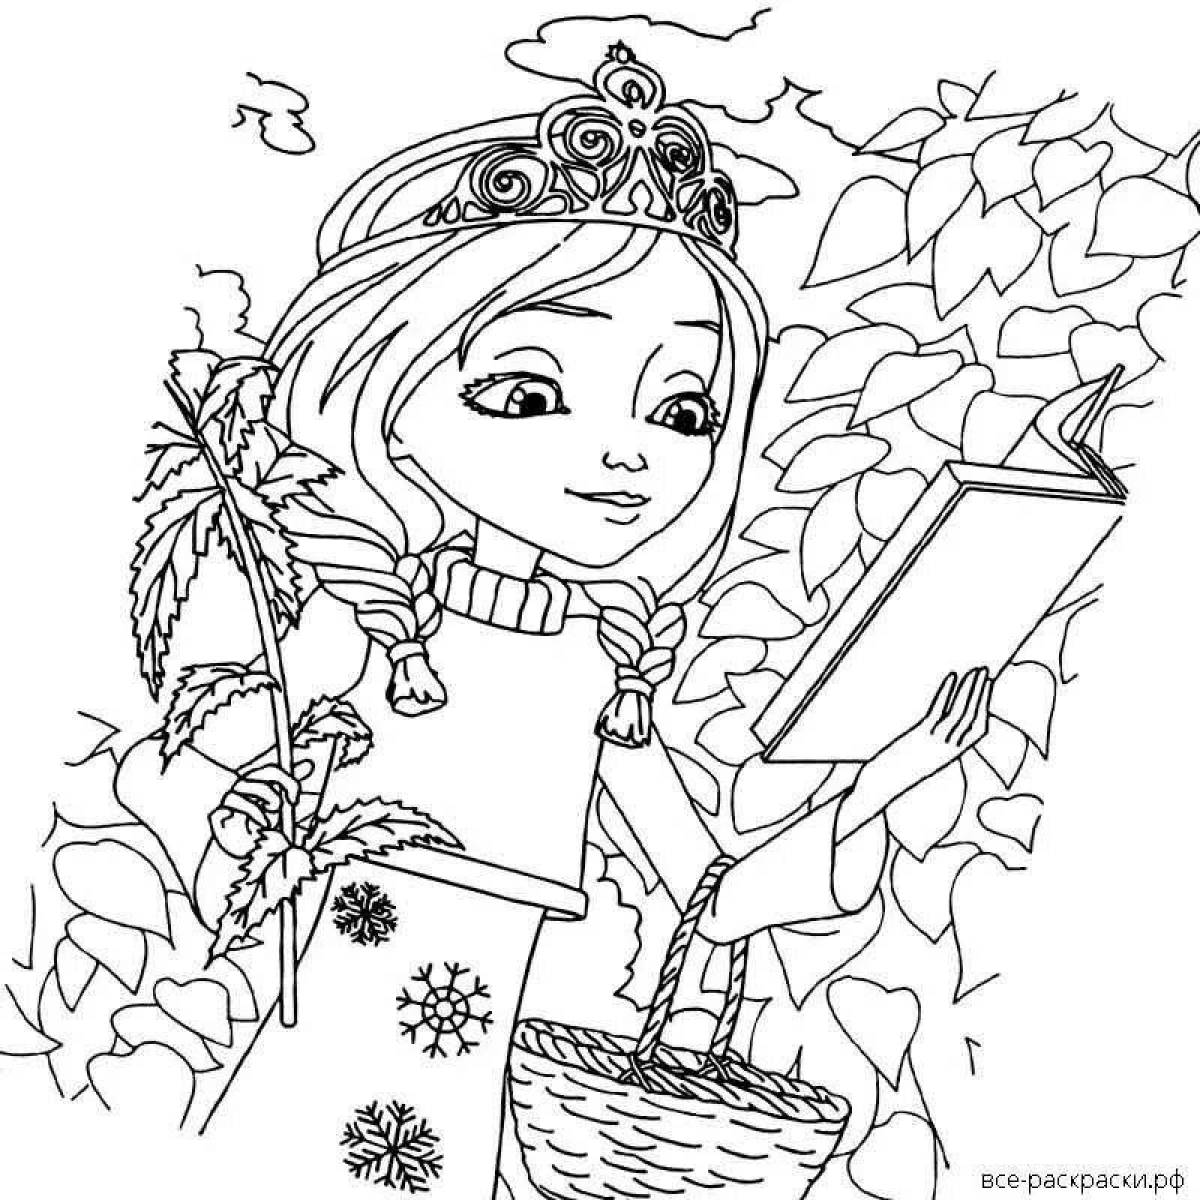 Shiny princess coloring pages for girls